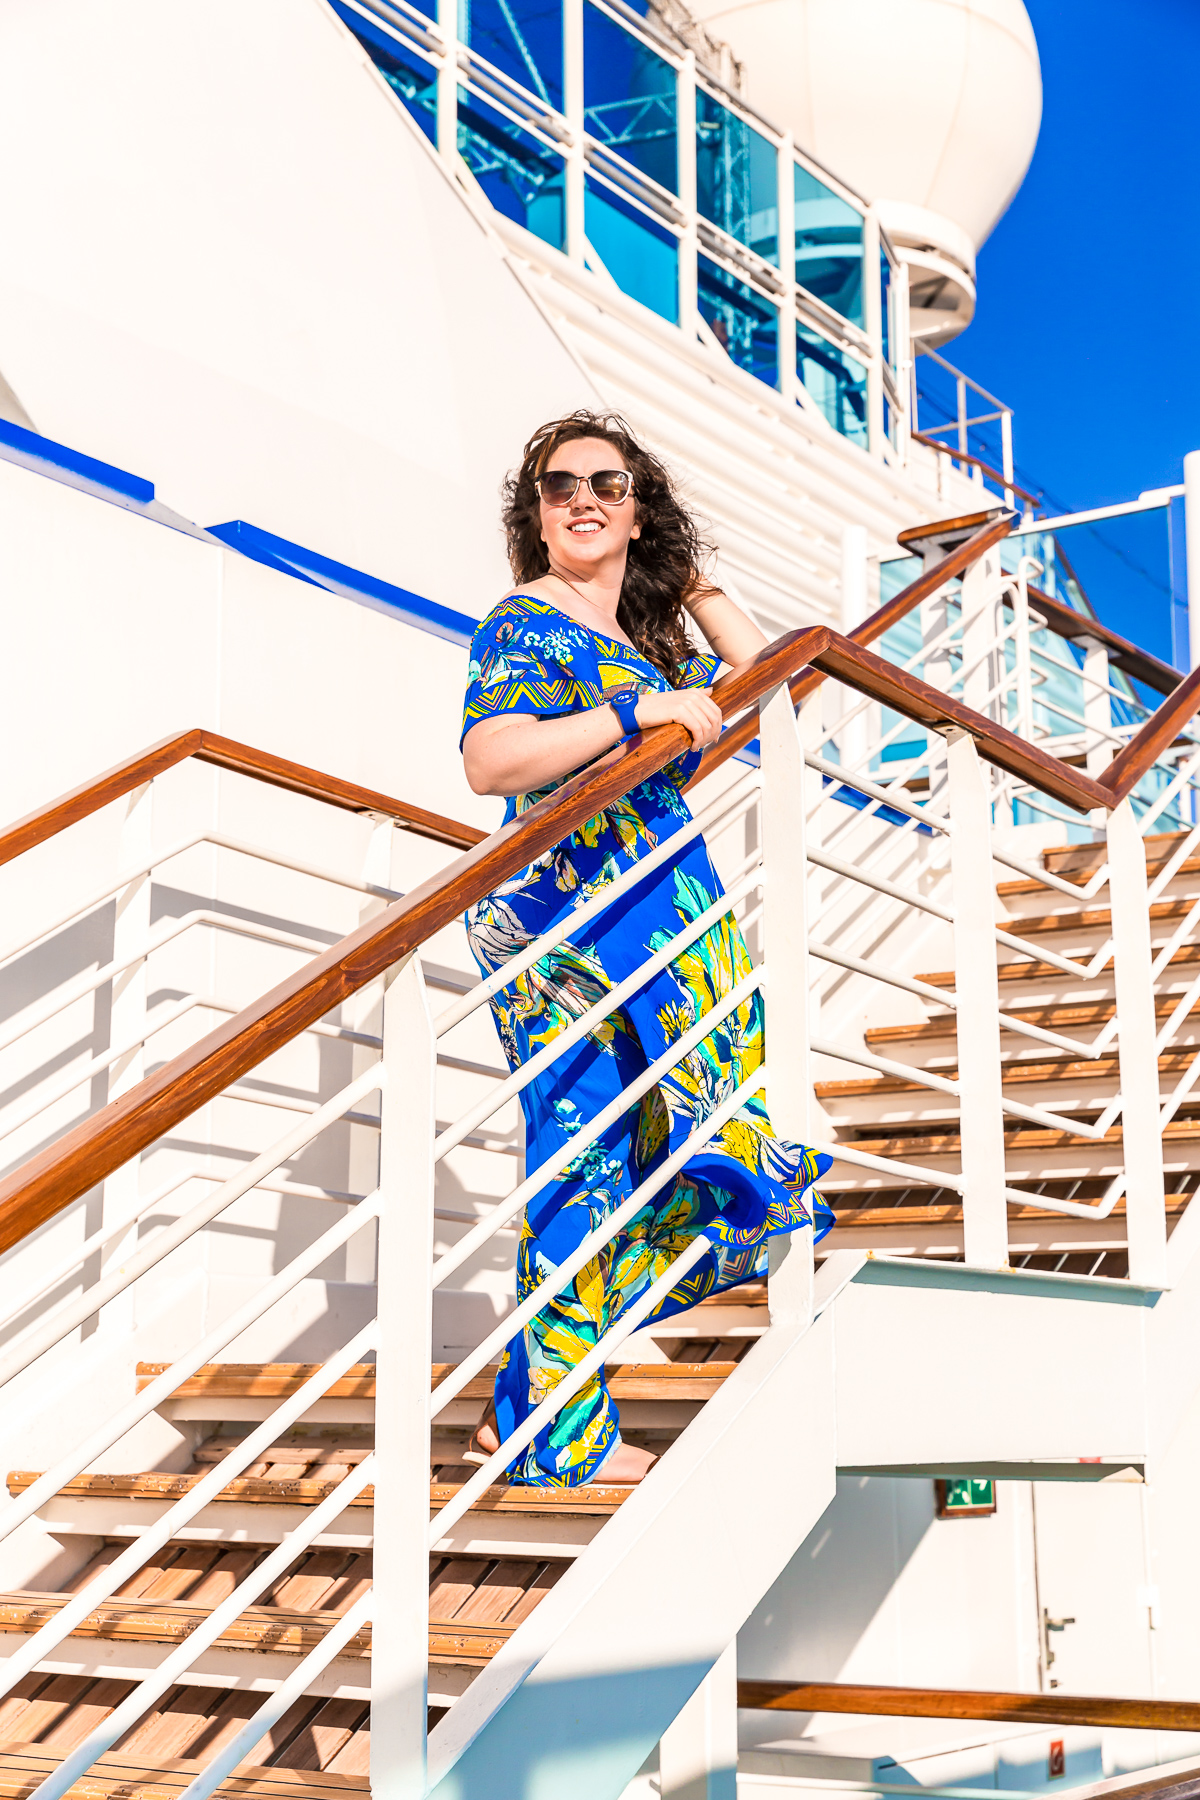 Woman in blue dress standing on stairs on a cruise ship.